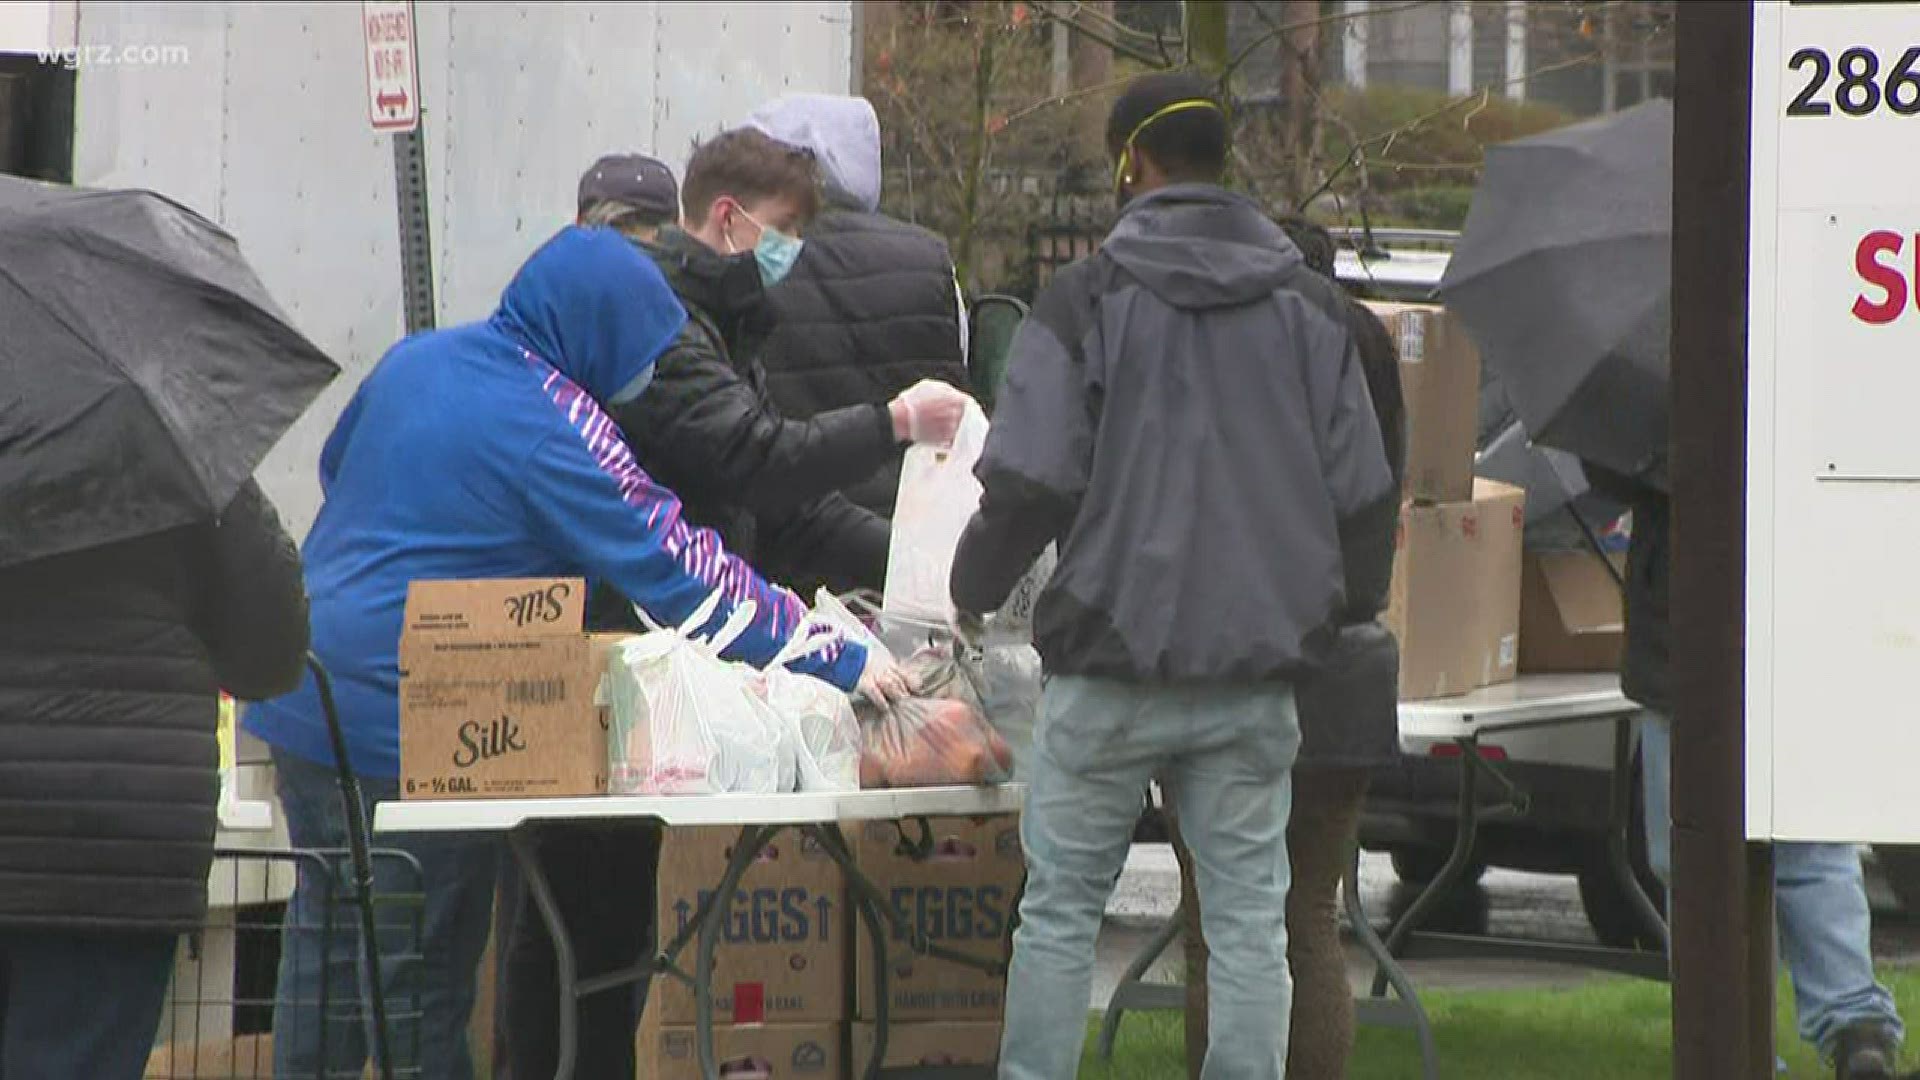 The organization fed the homeless while also giving away groceries to Buffalo families in need as it's been doing for six weeks now.